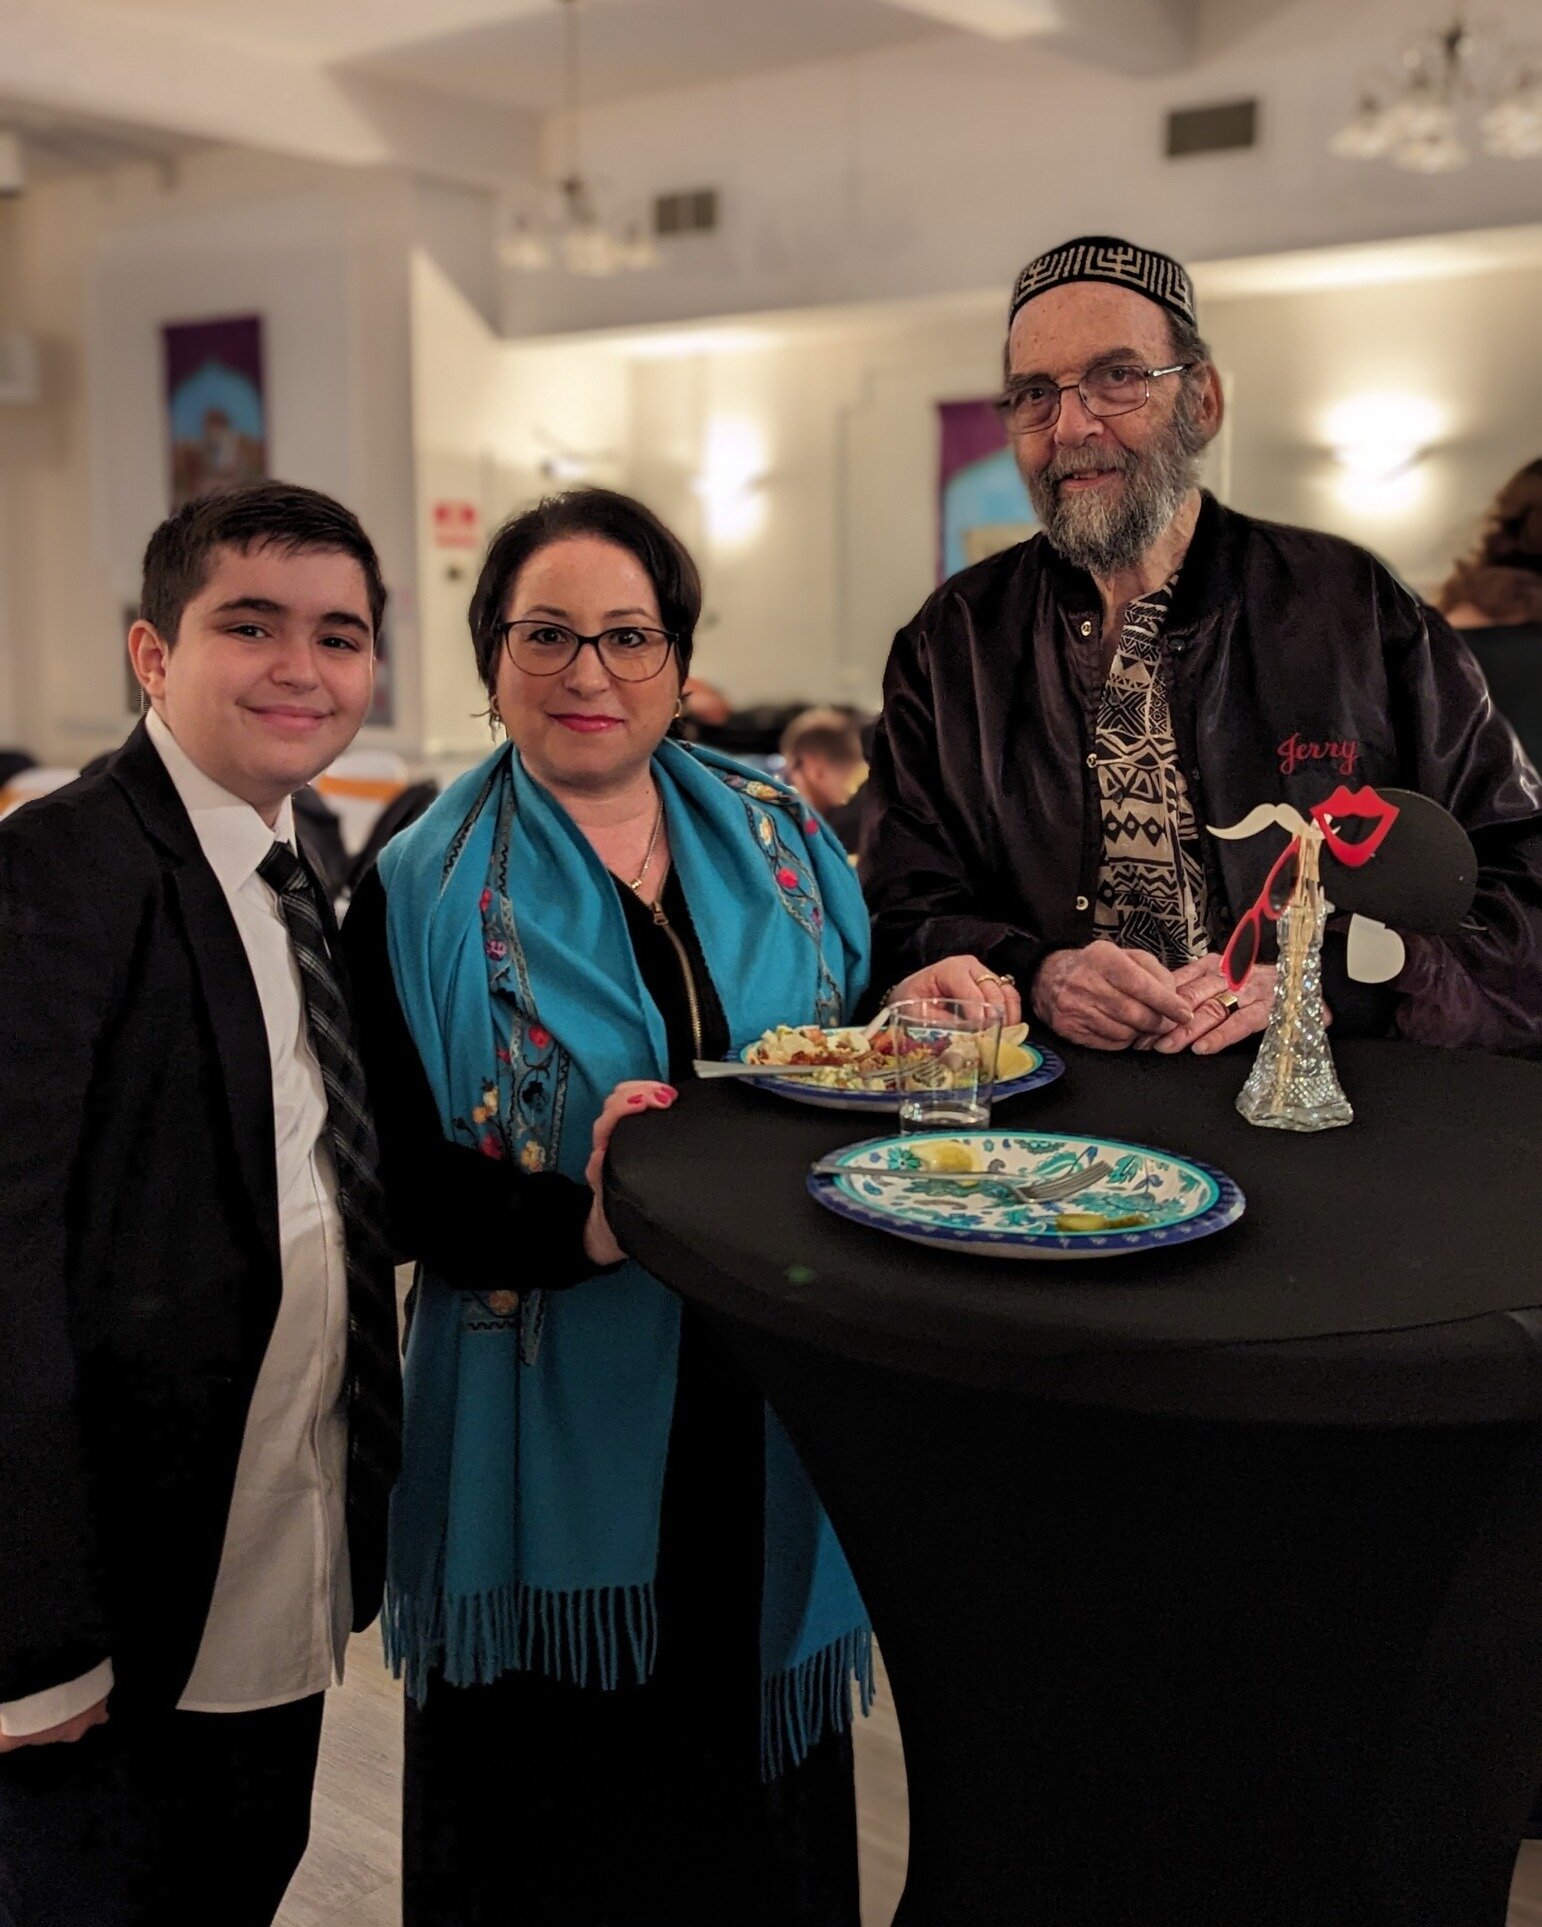 A packed #Purim of joy! This fabulous Saturday night celebration was just what we needed: community, creativity, art, food, diversity, love, and a whole lot of fun. Thank you to everyone who made this Purim so special.